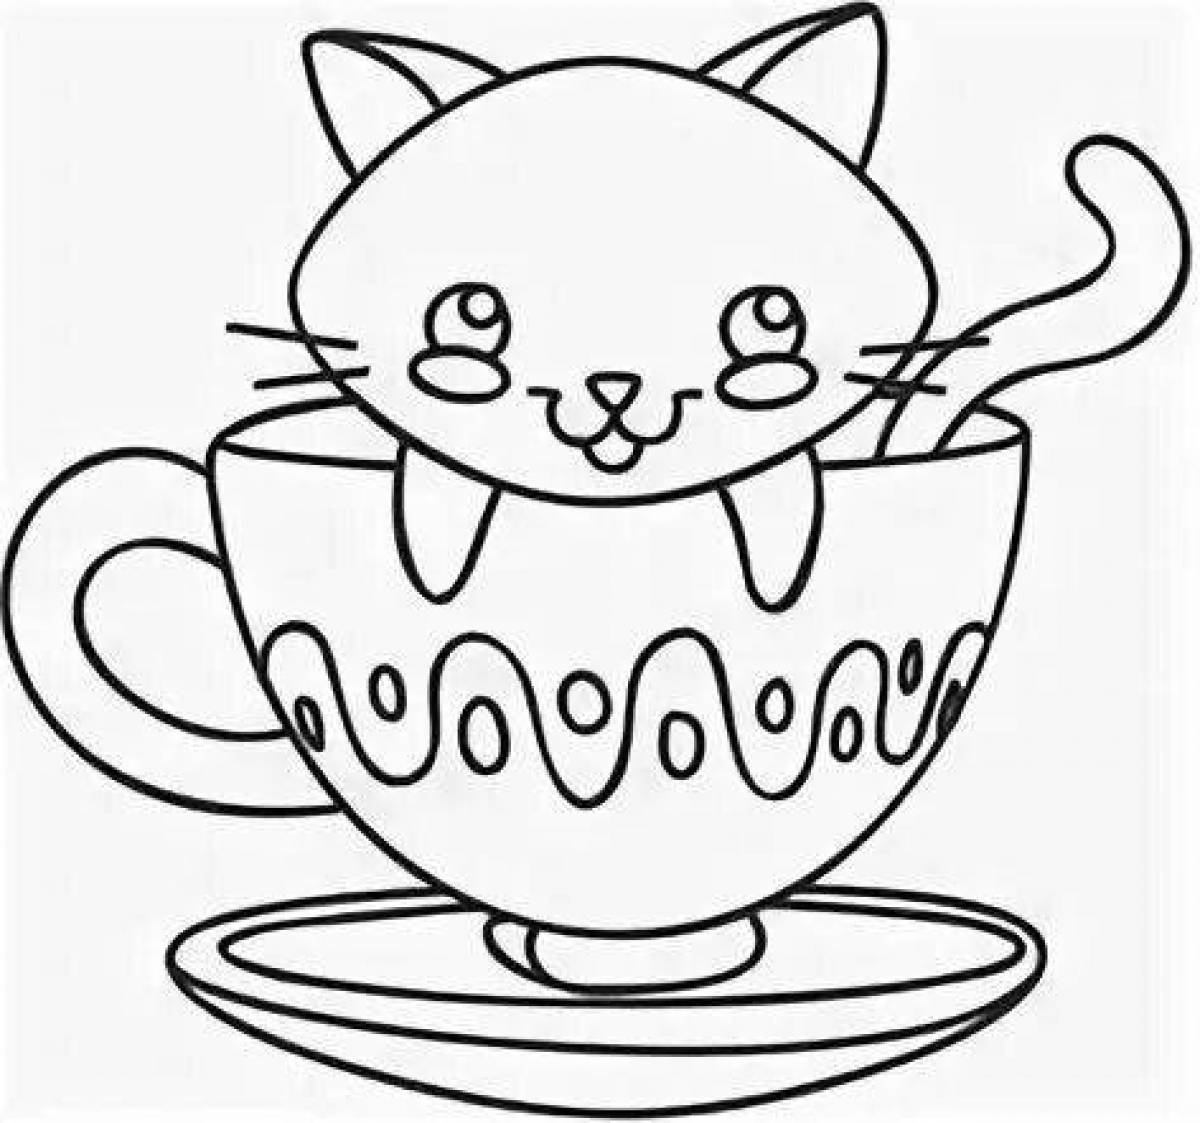 Coloring page napping cat in a mug